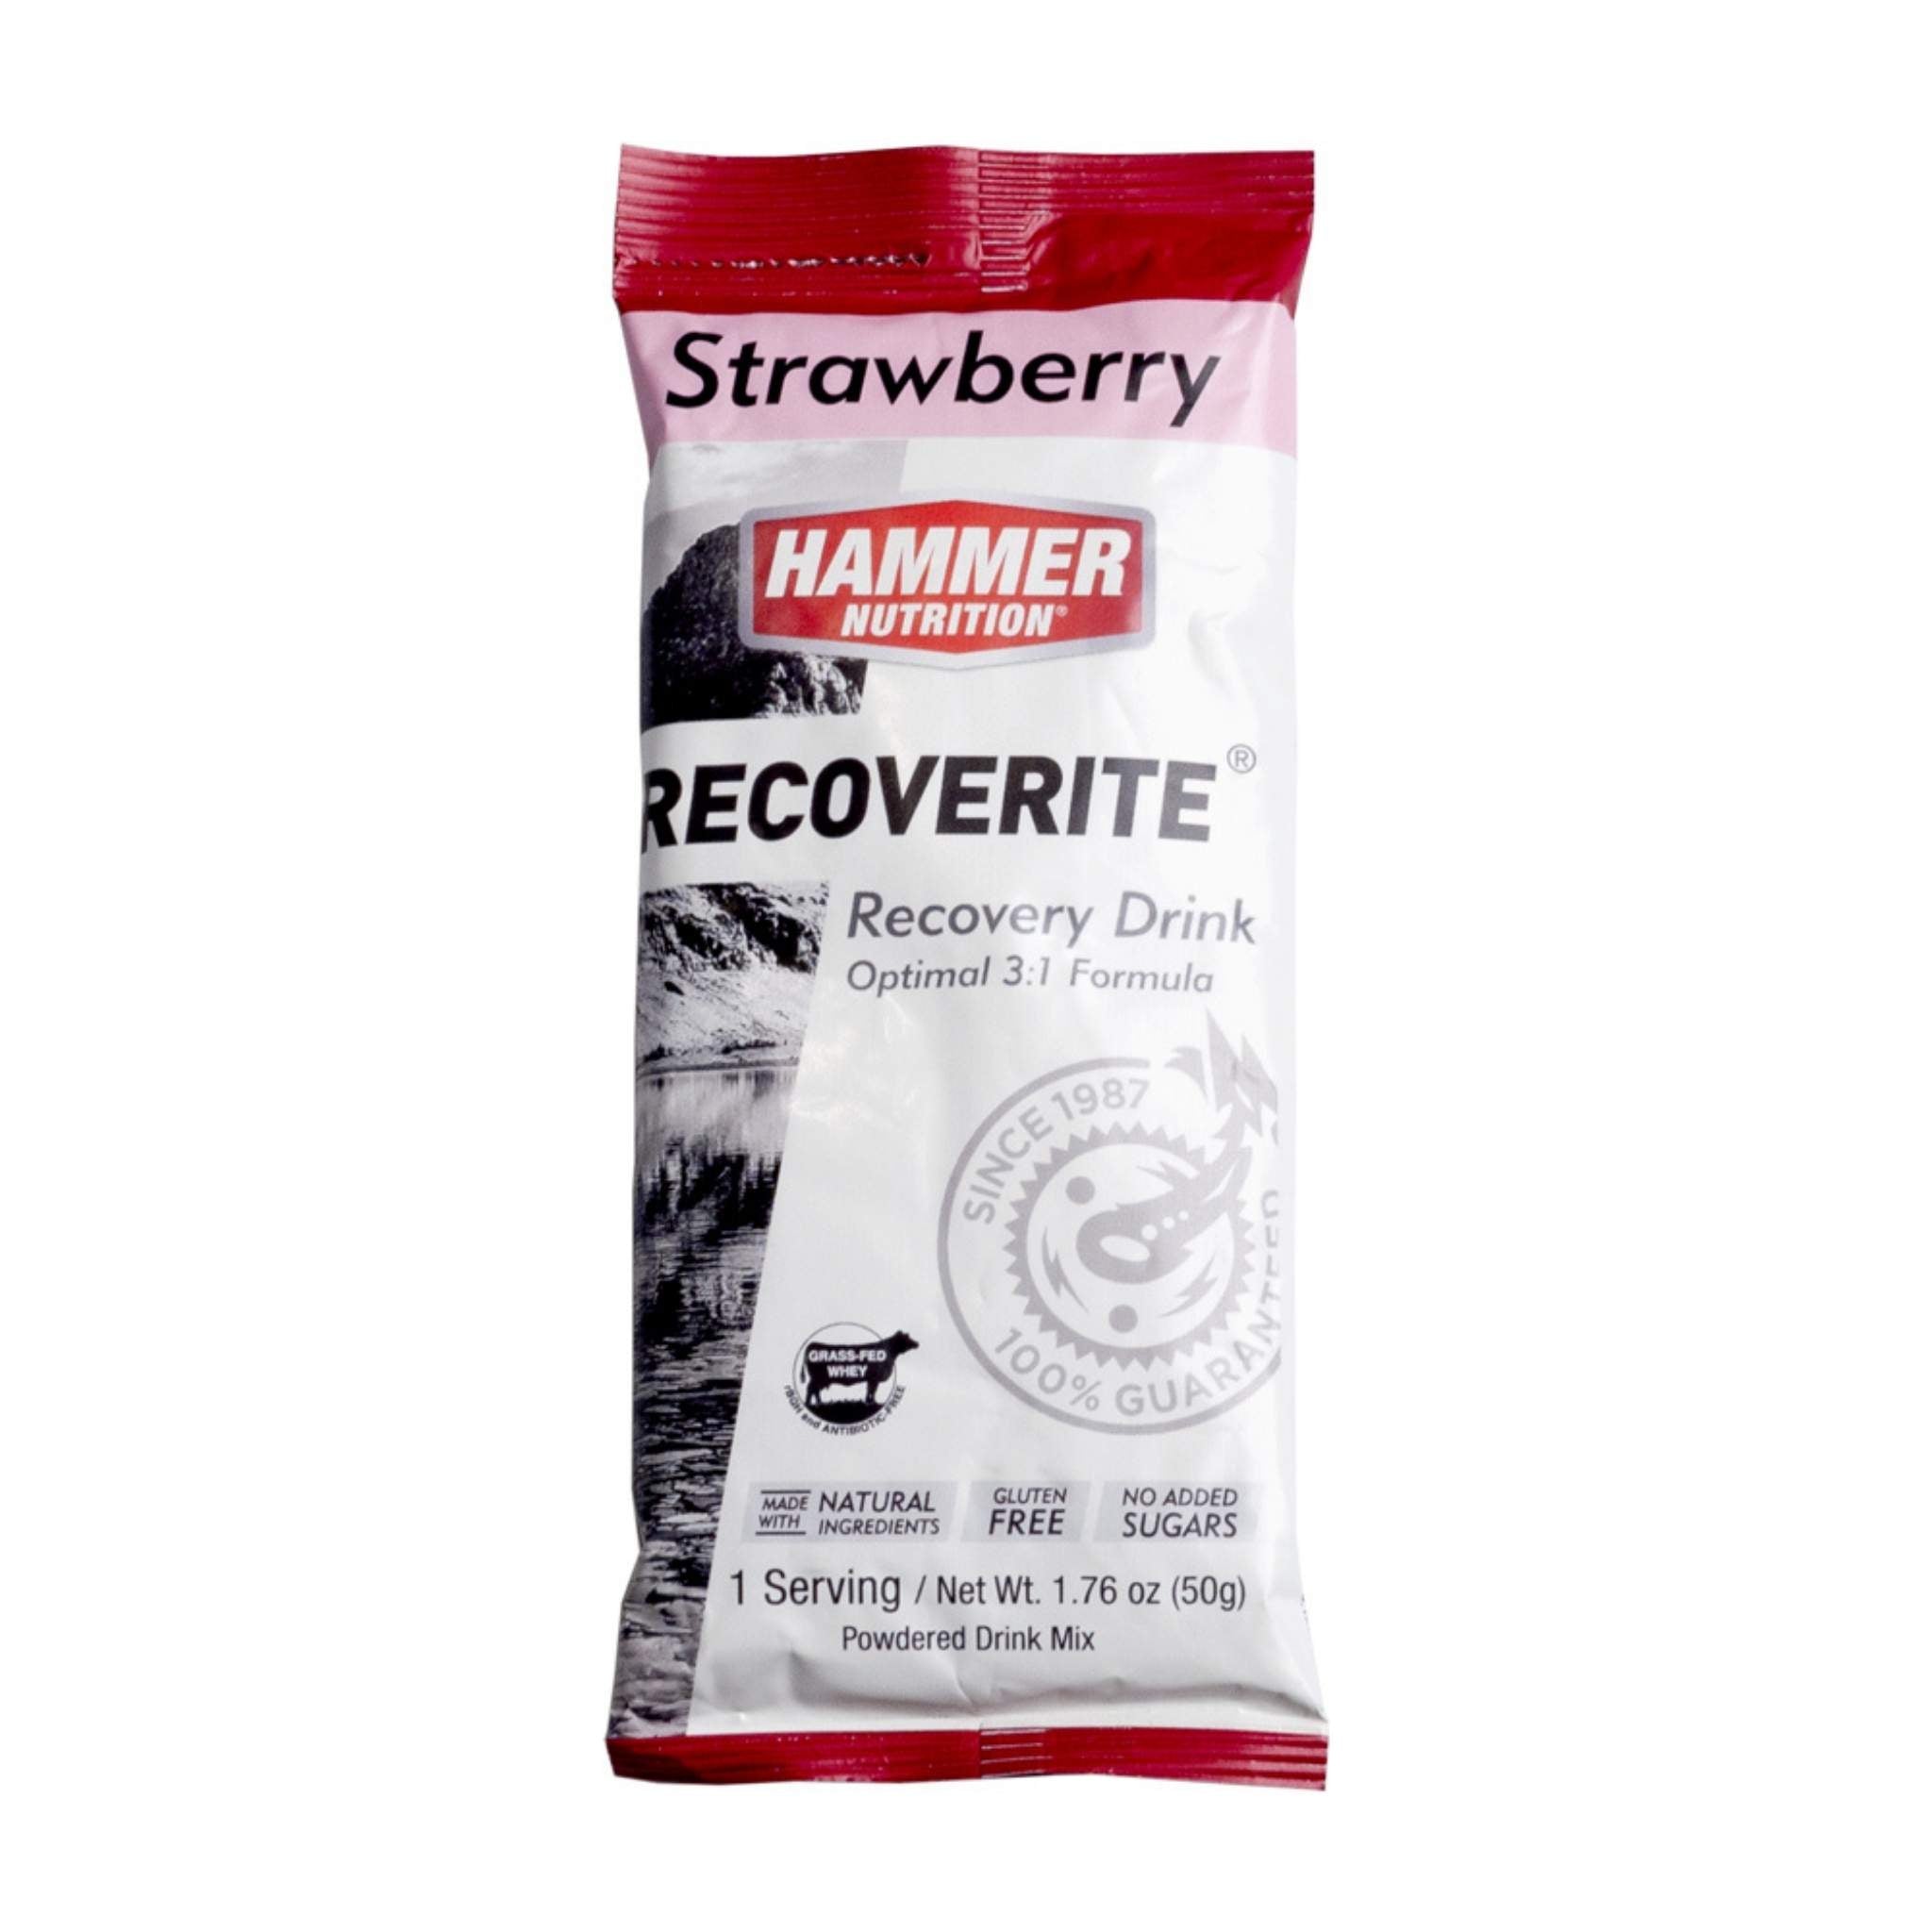 Hammer Nutrition - Recoverite, Strawberry, Single Serving, Team Perfect